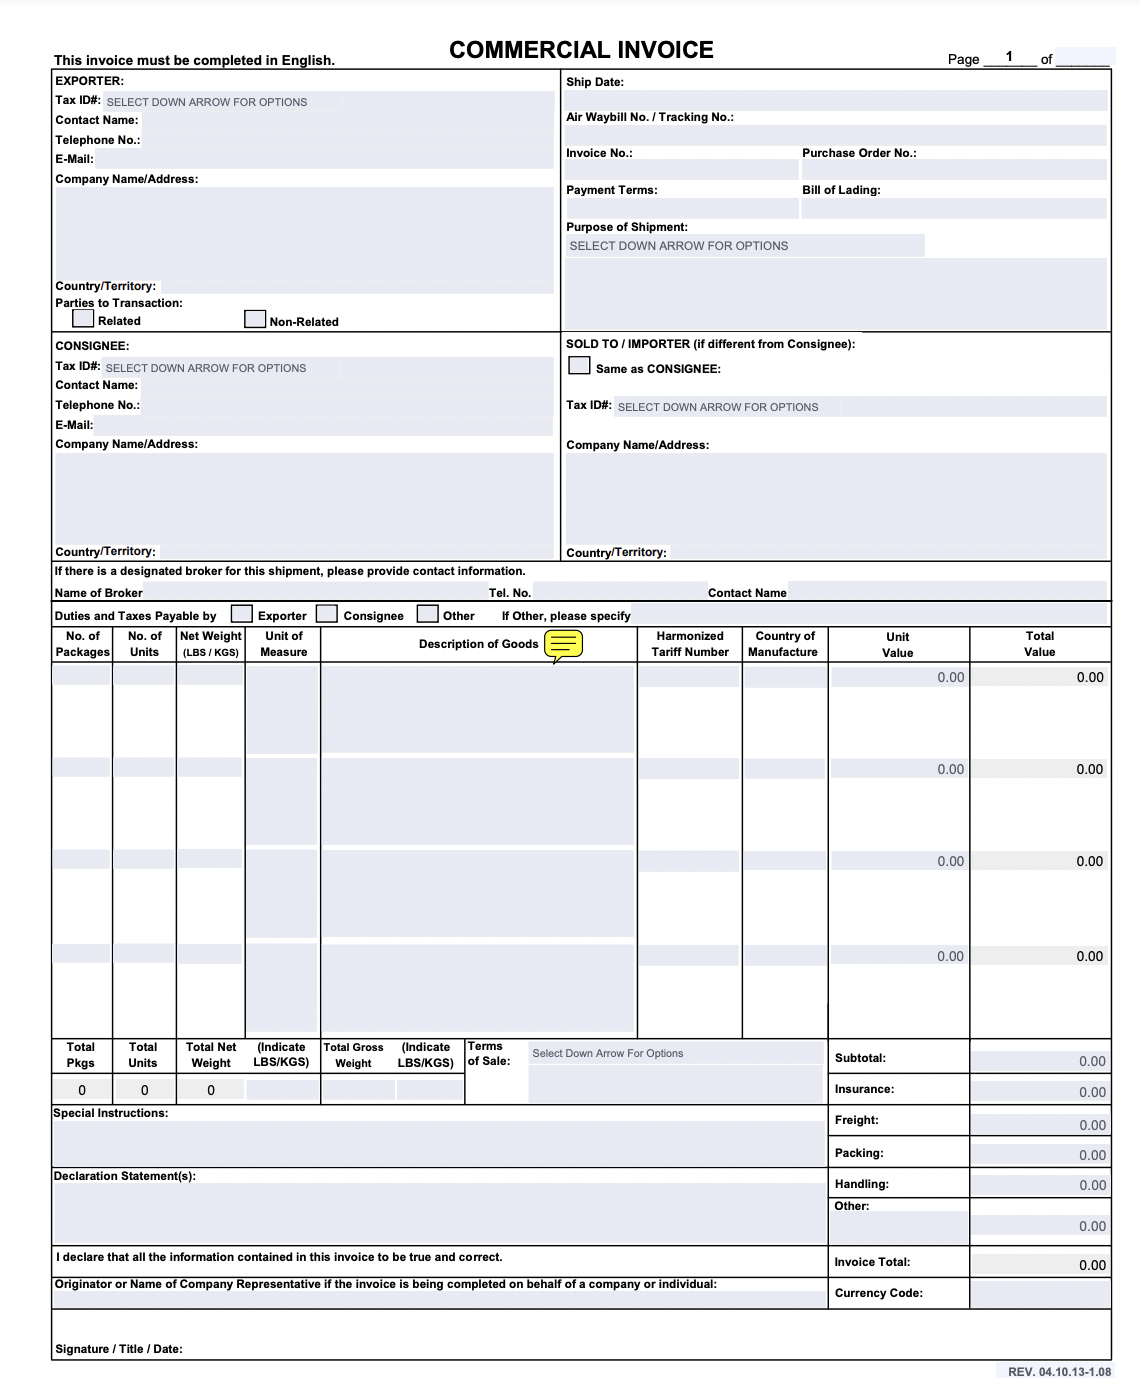 Commercial invoice example for the customs clearance
process.